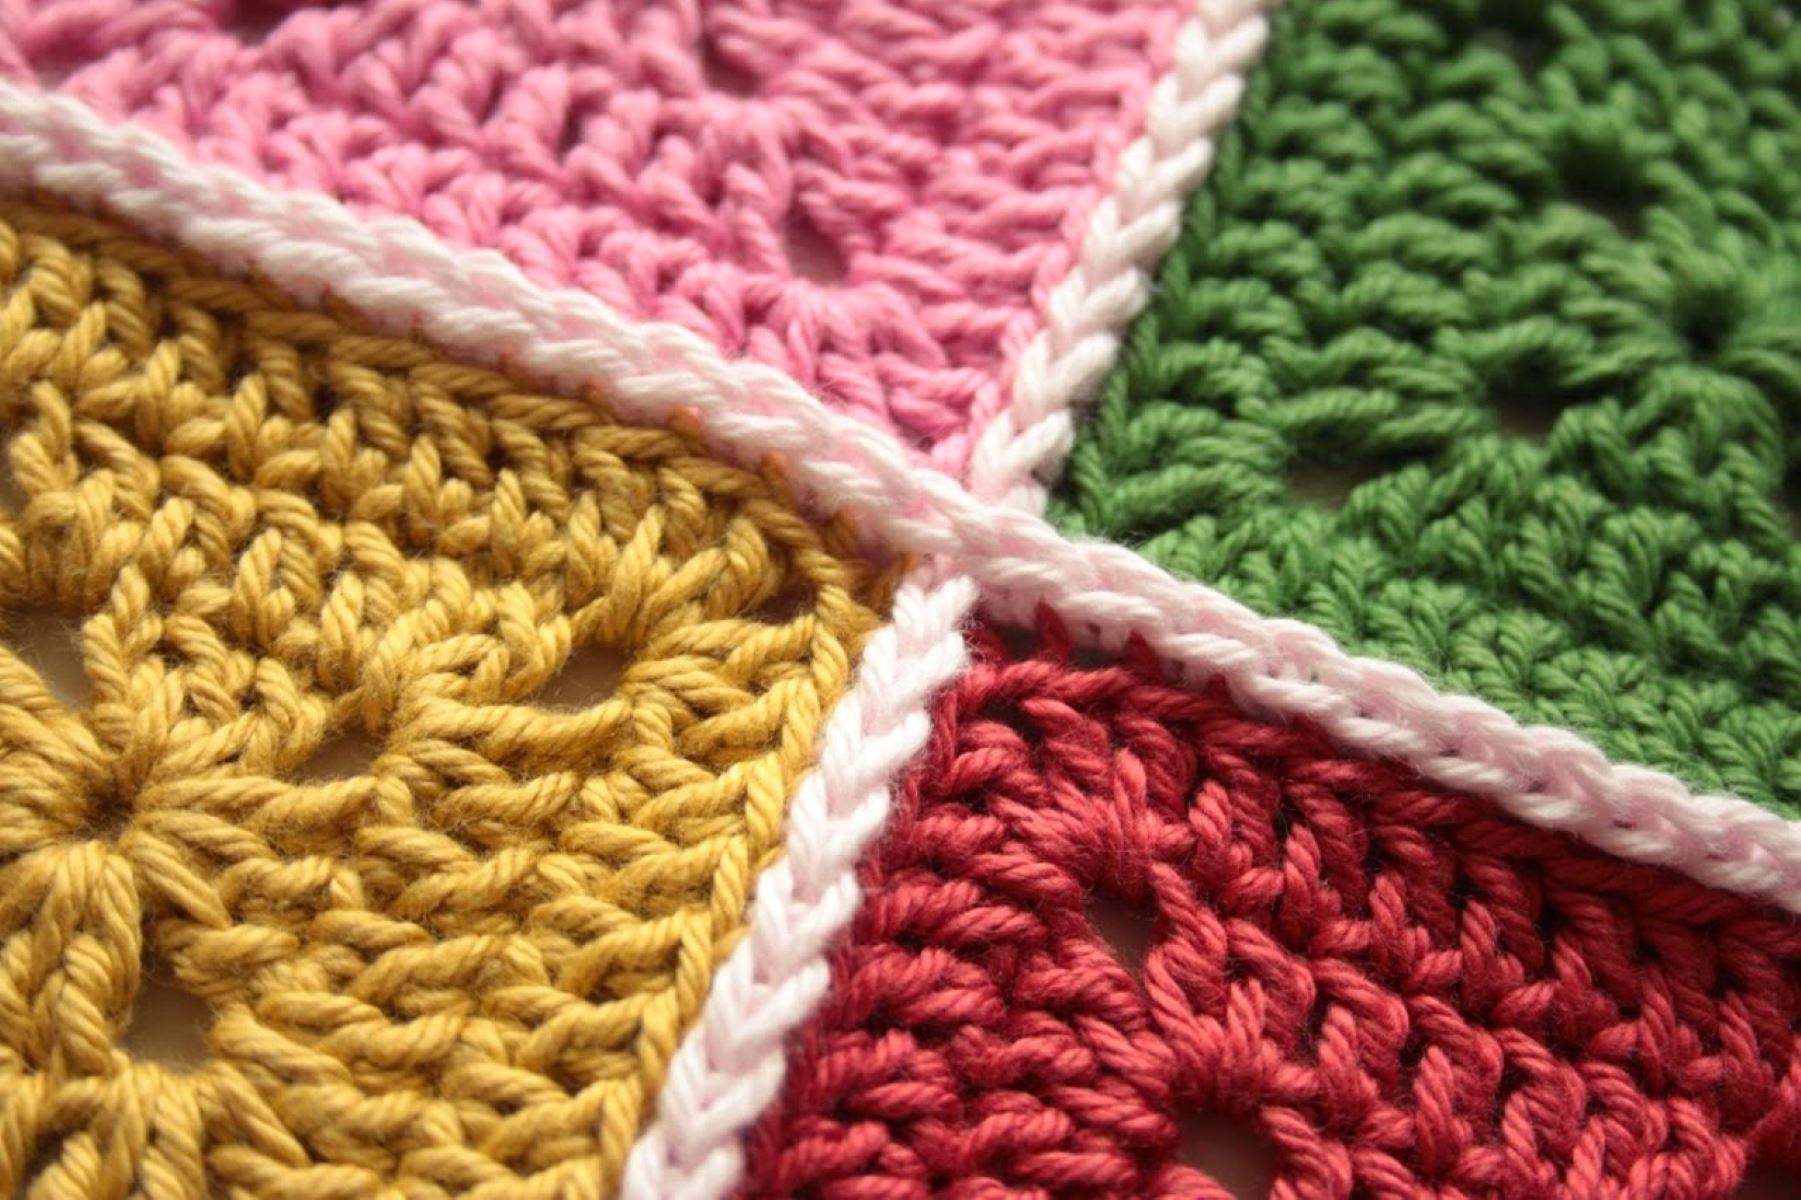 How To Connect Granny Squares Into A Blanket